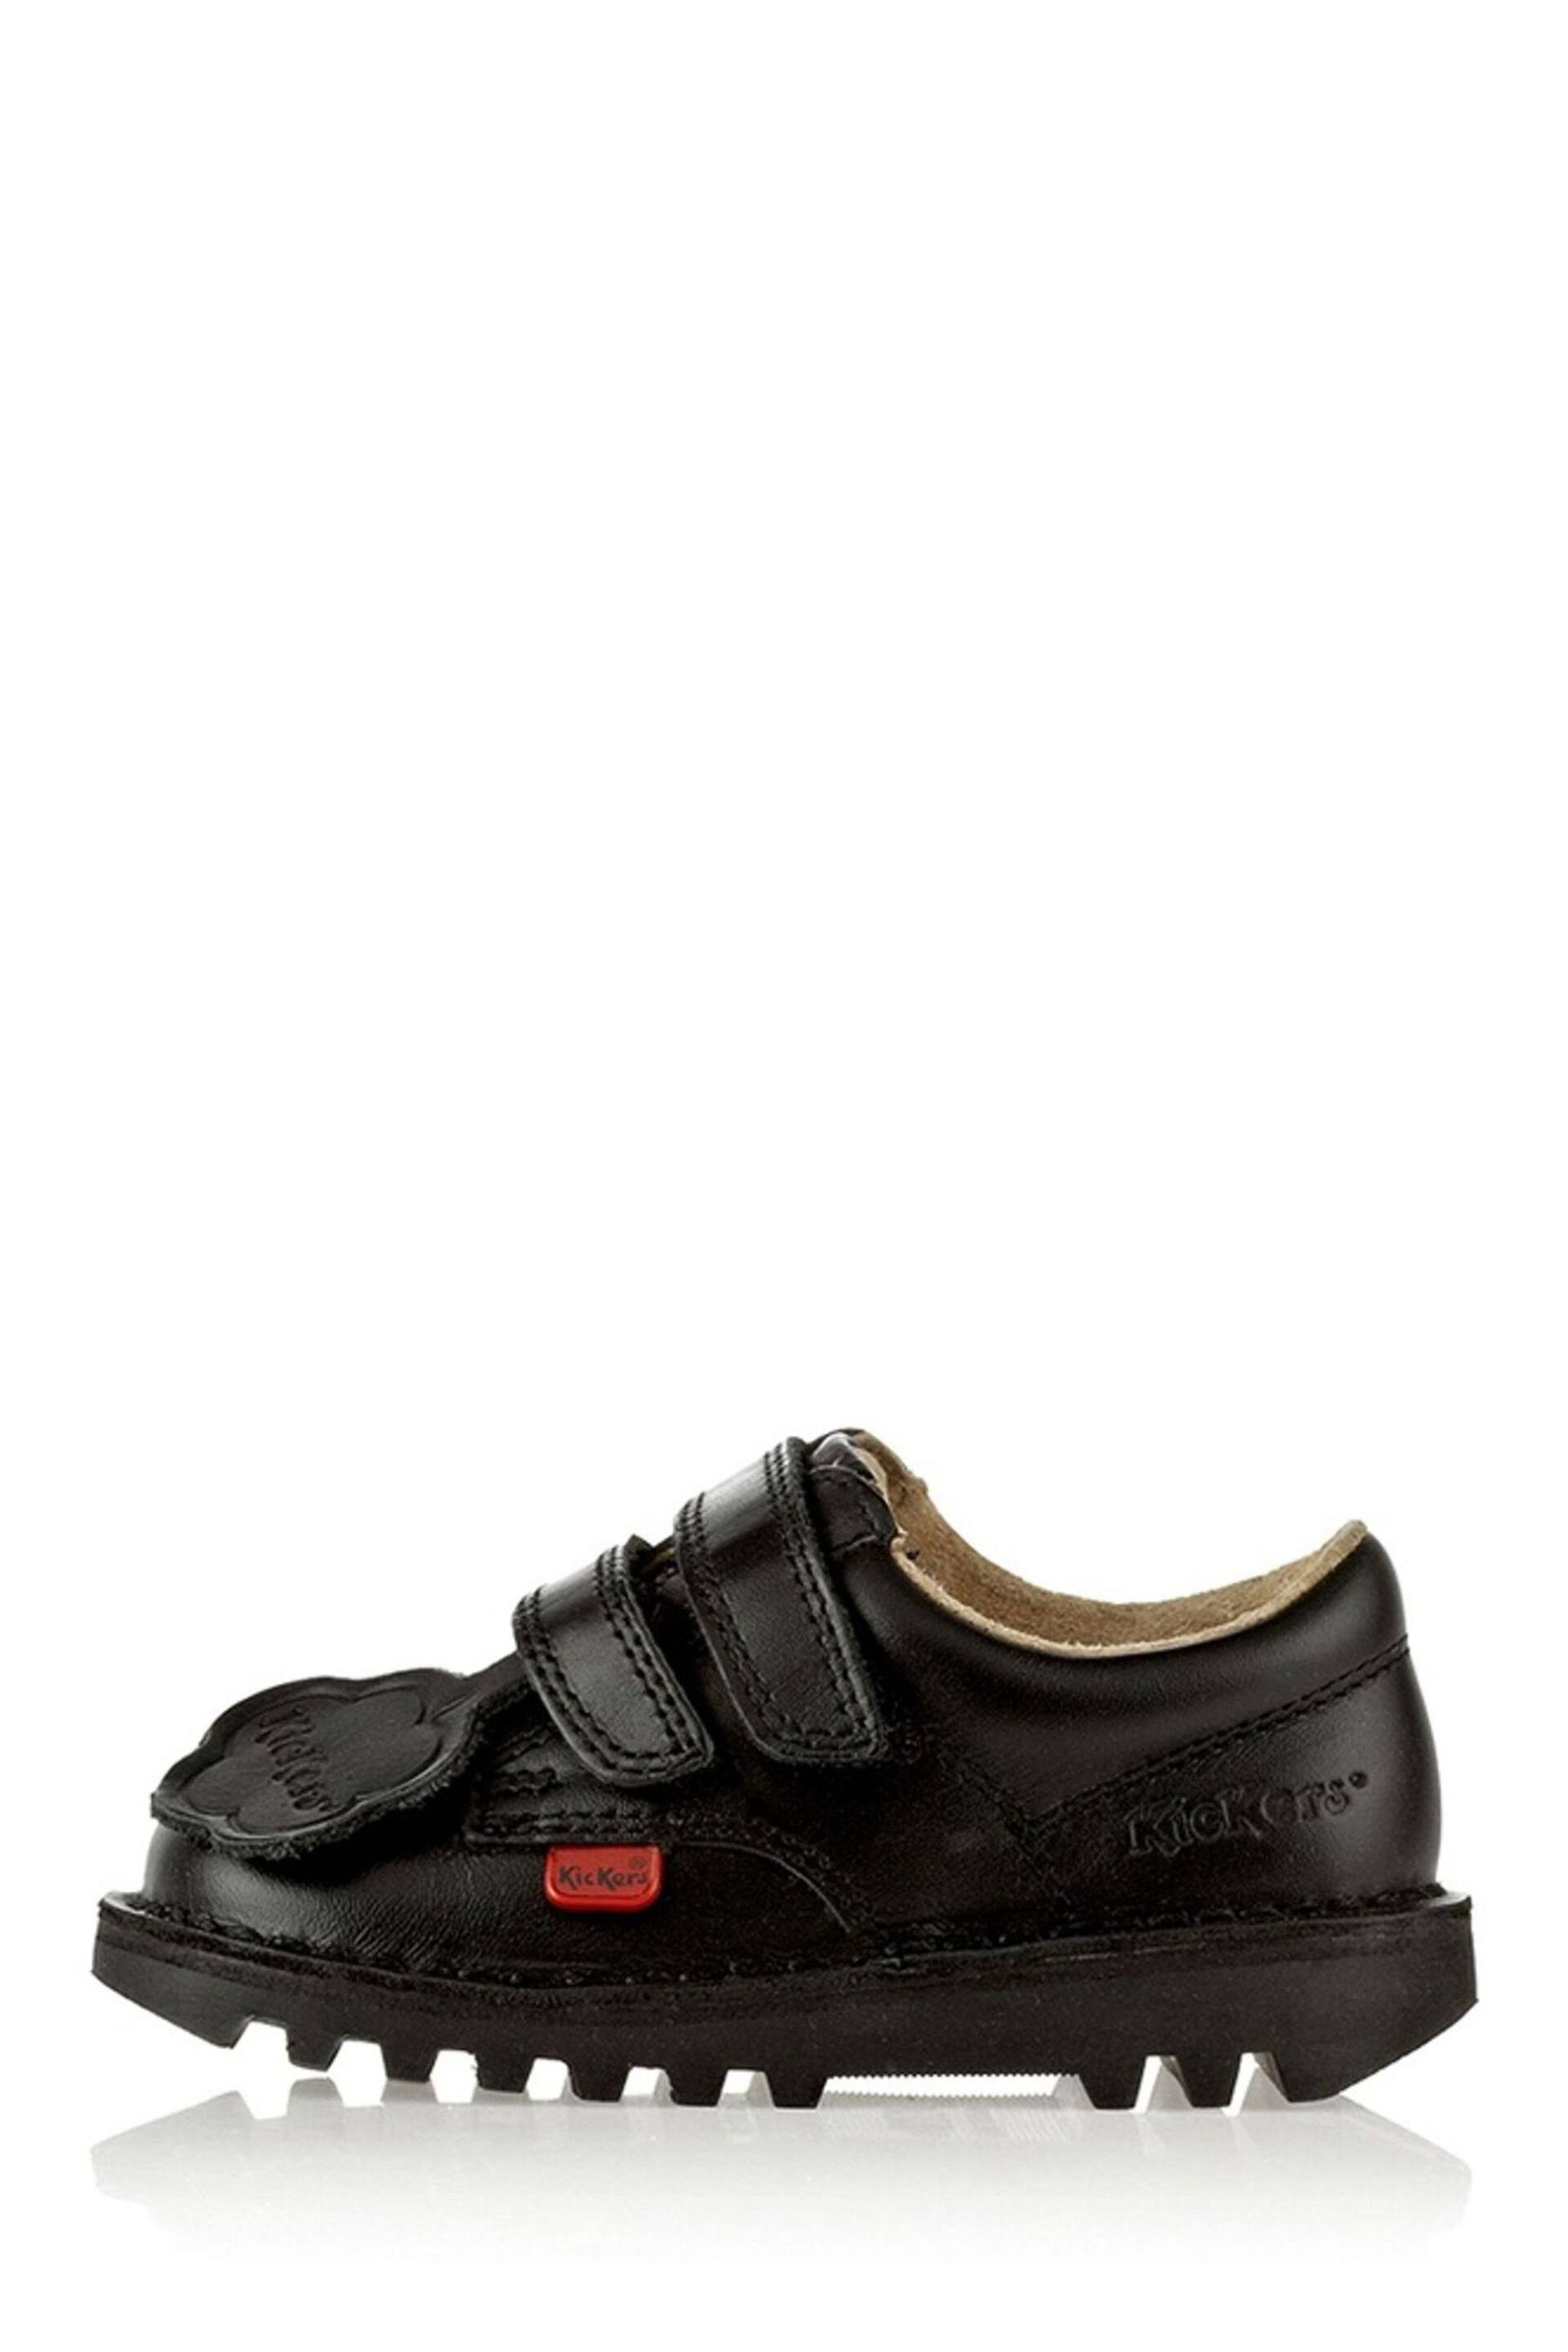 Kickers Junior Kick Lo Hook and Loop Leather Shoes - Image 1 of 6